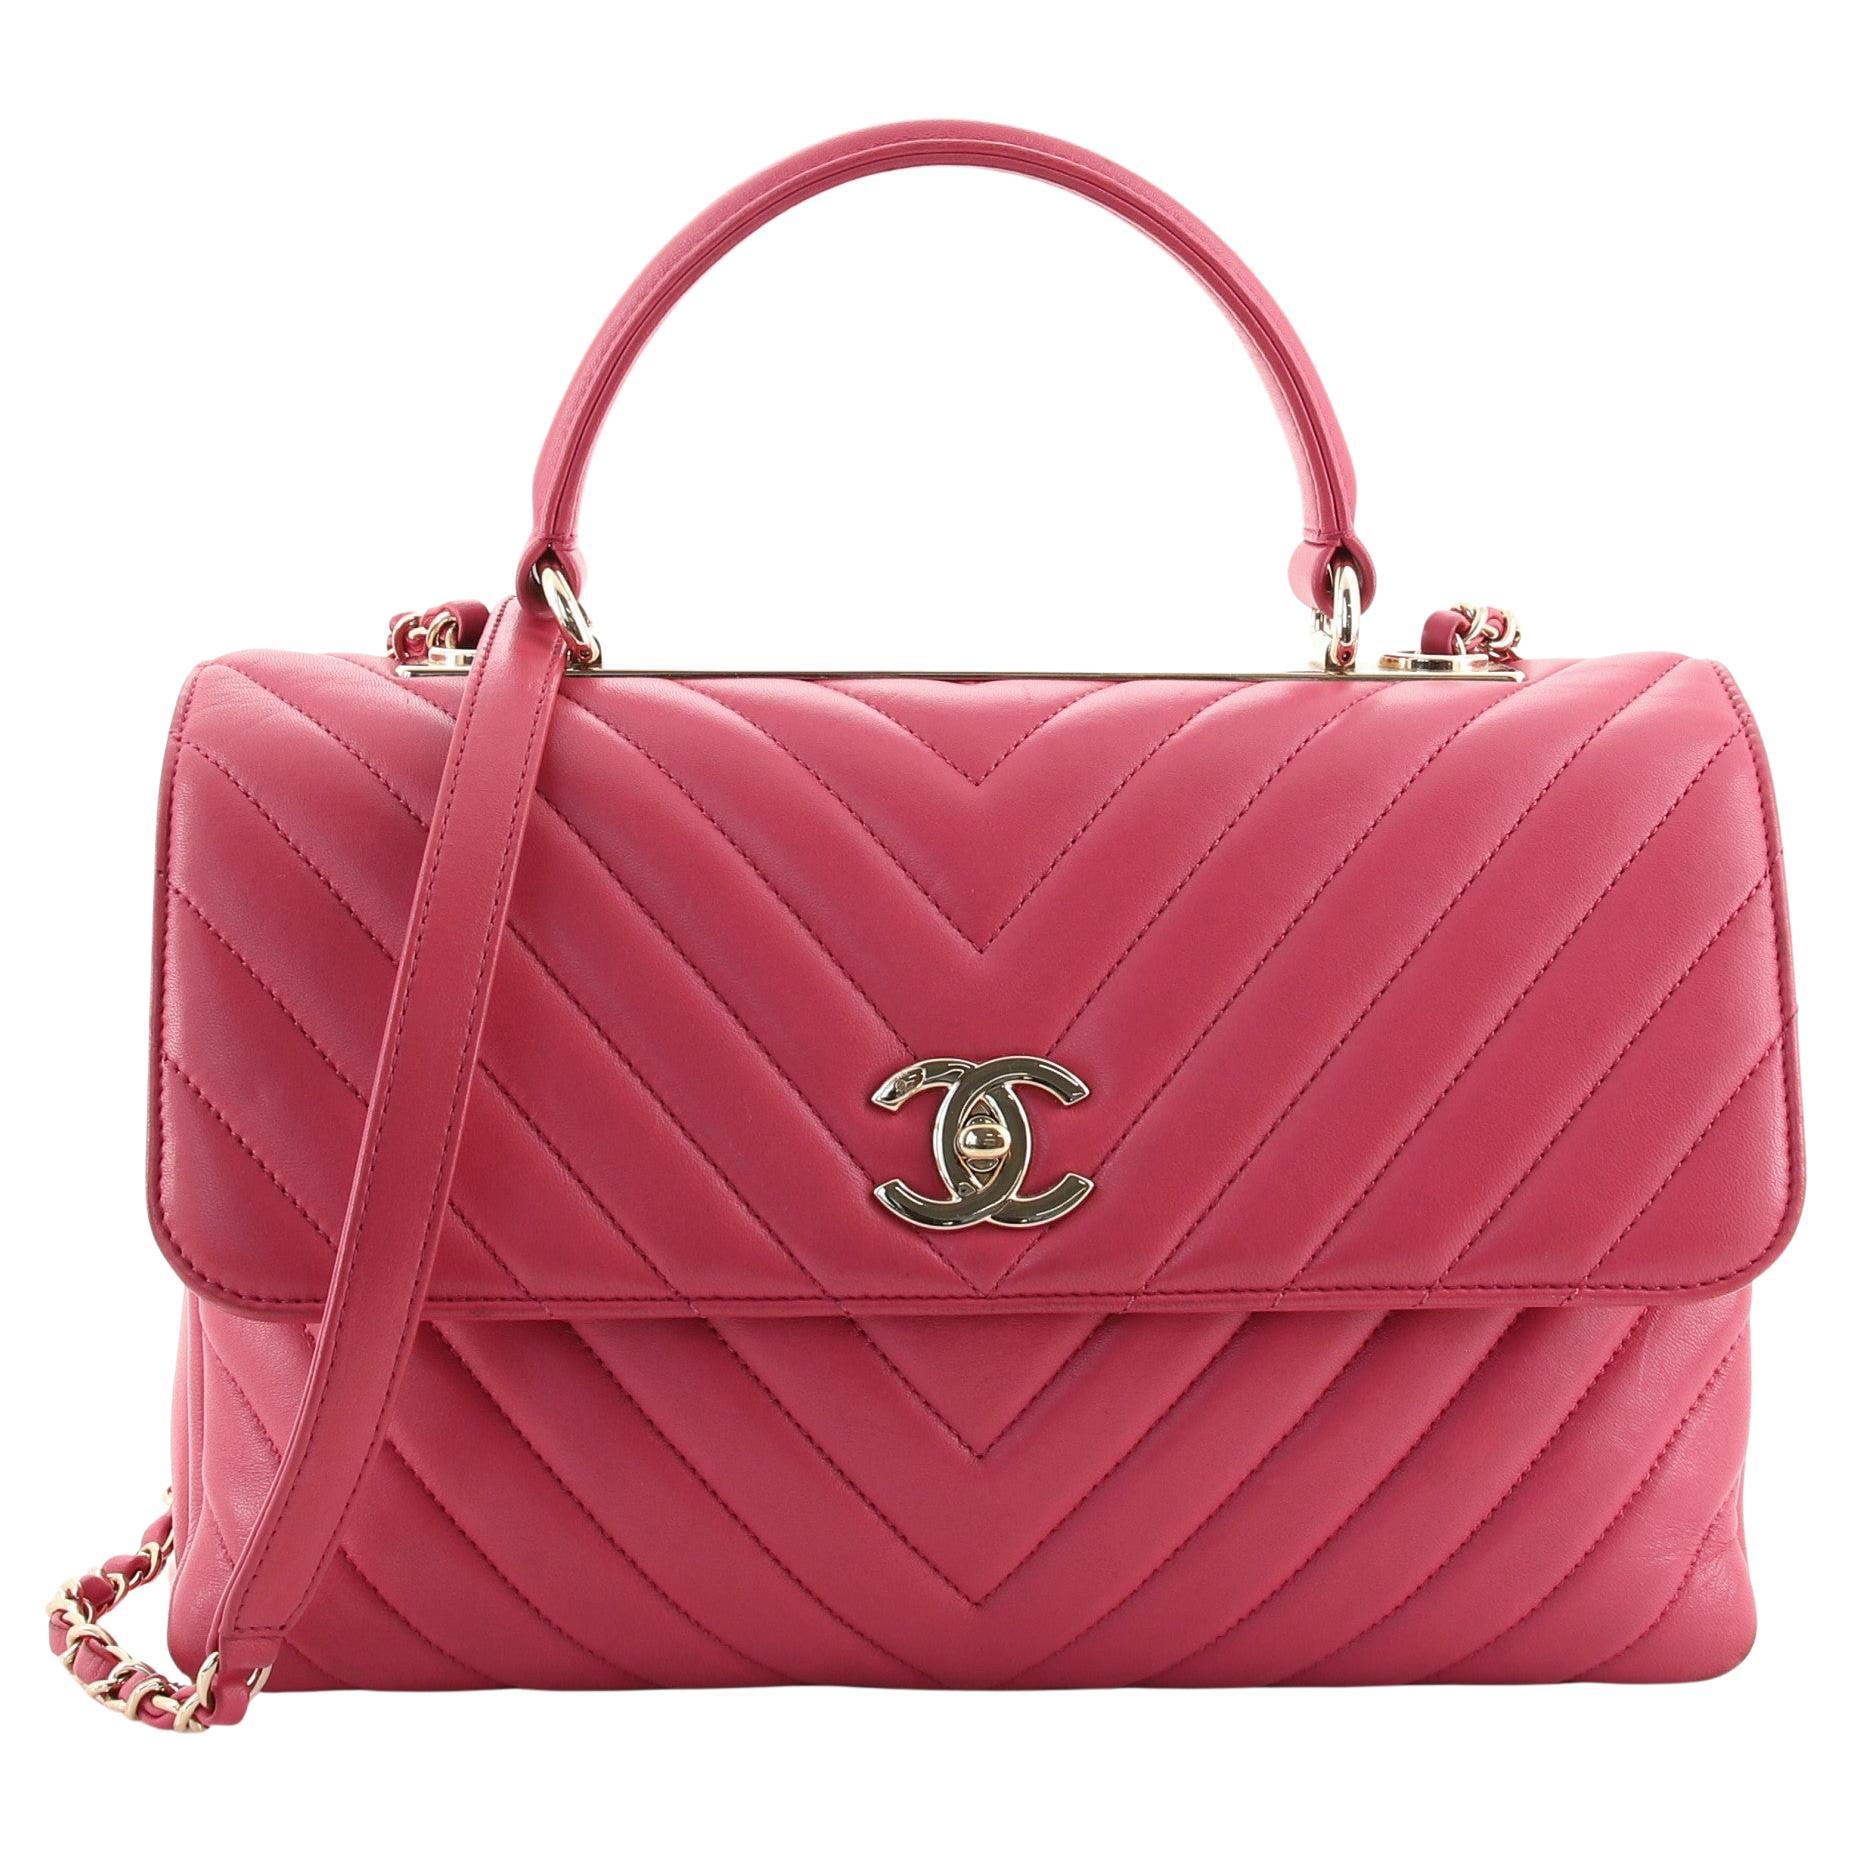 Chanel 19 Pink - 189 For Sale on 1stDibs  chanel 19 neon pink, pink chanel  19, chanel 19 hot pink